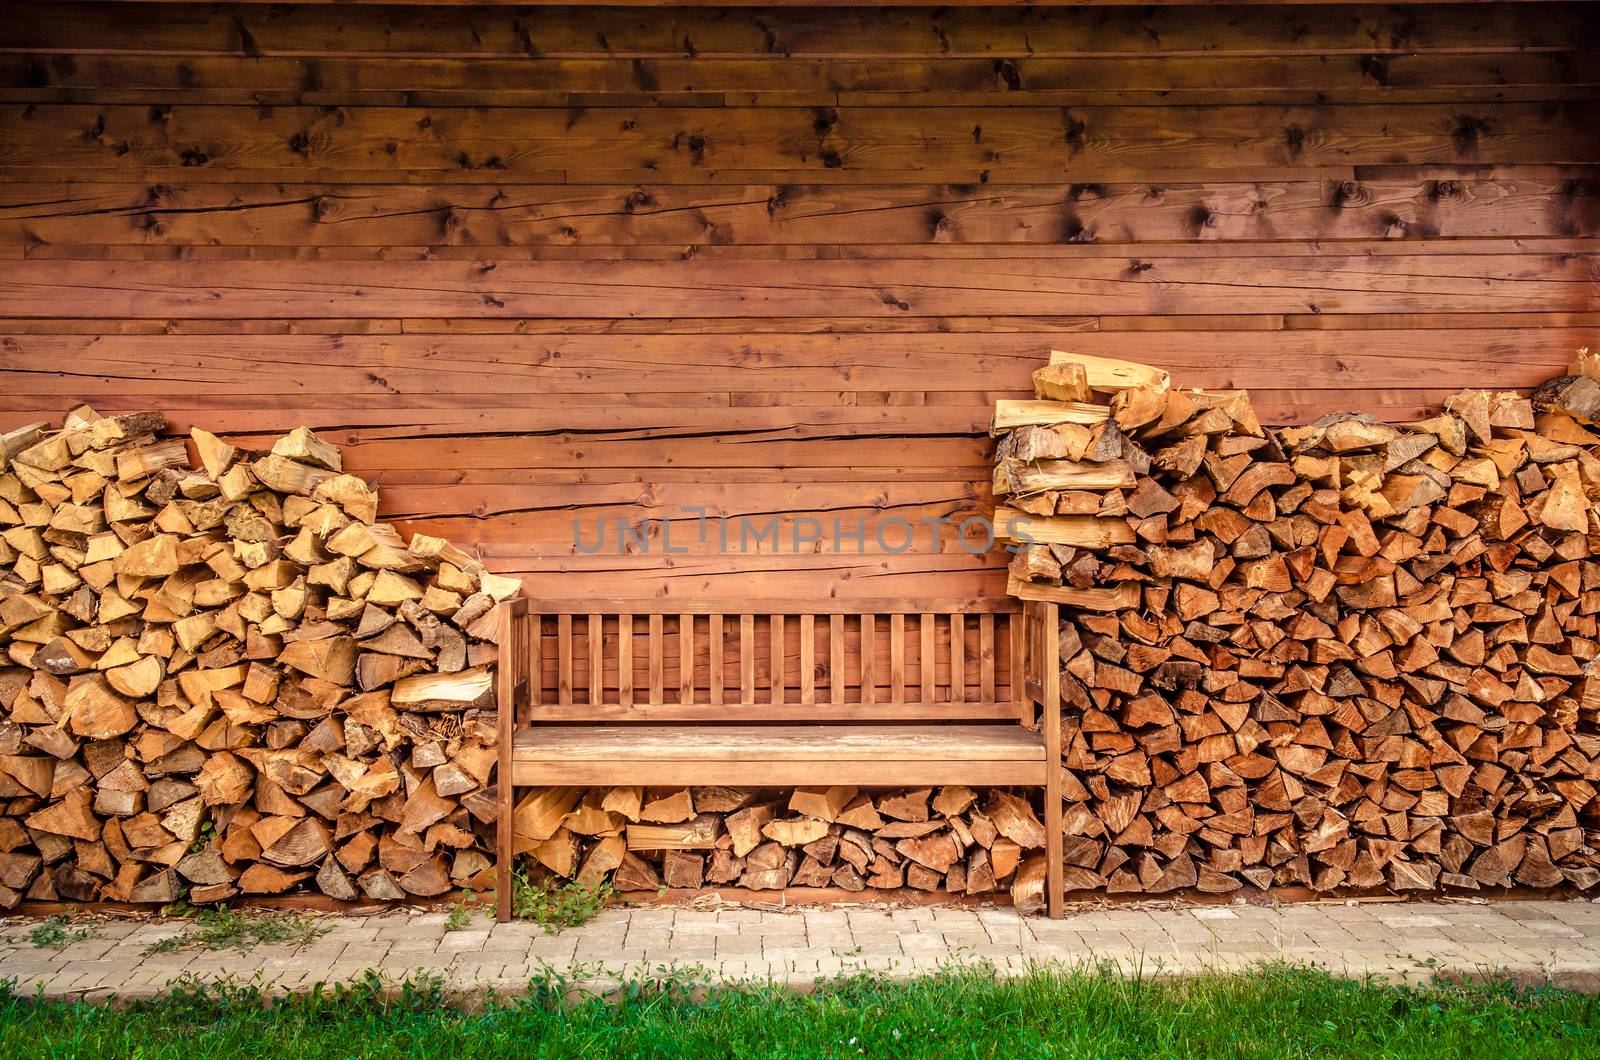 Detail of empty wooden bench with pile of firewood